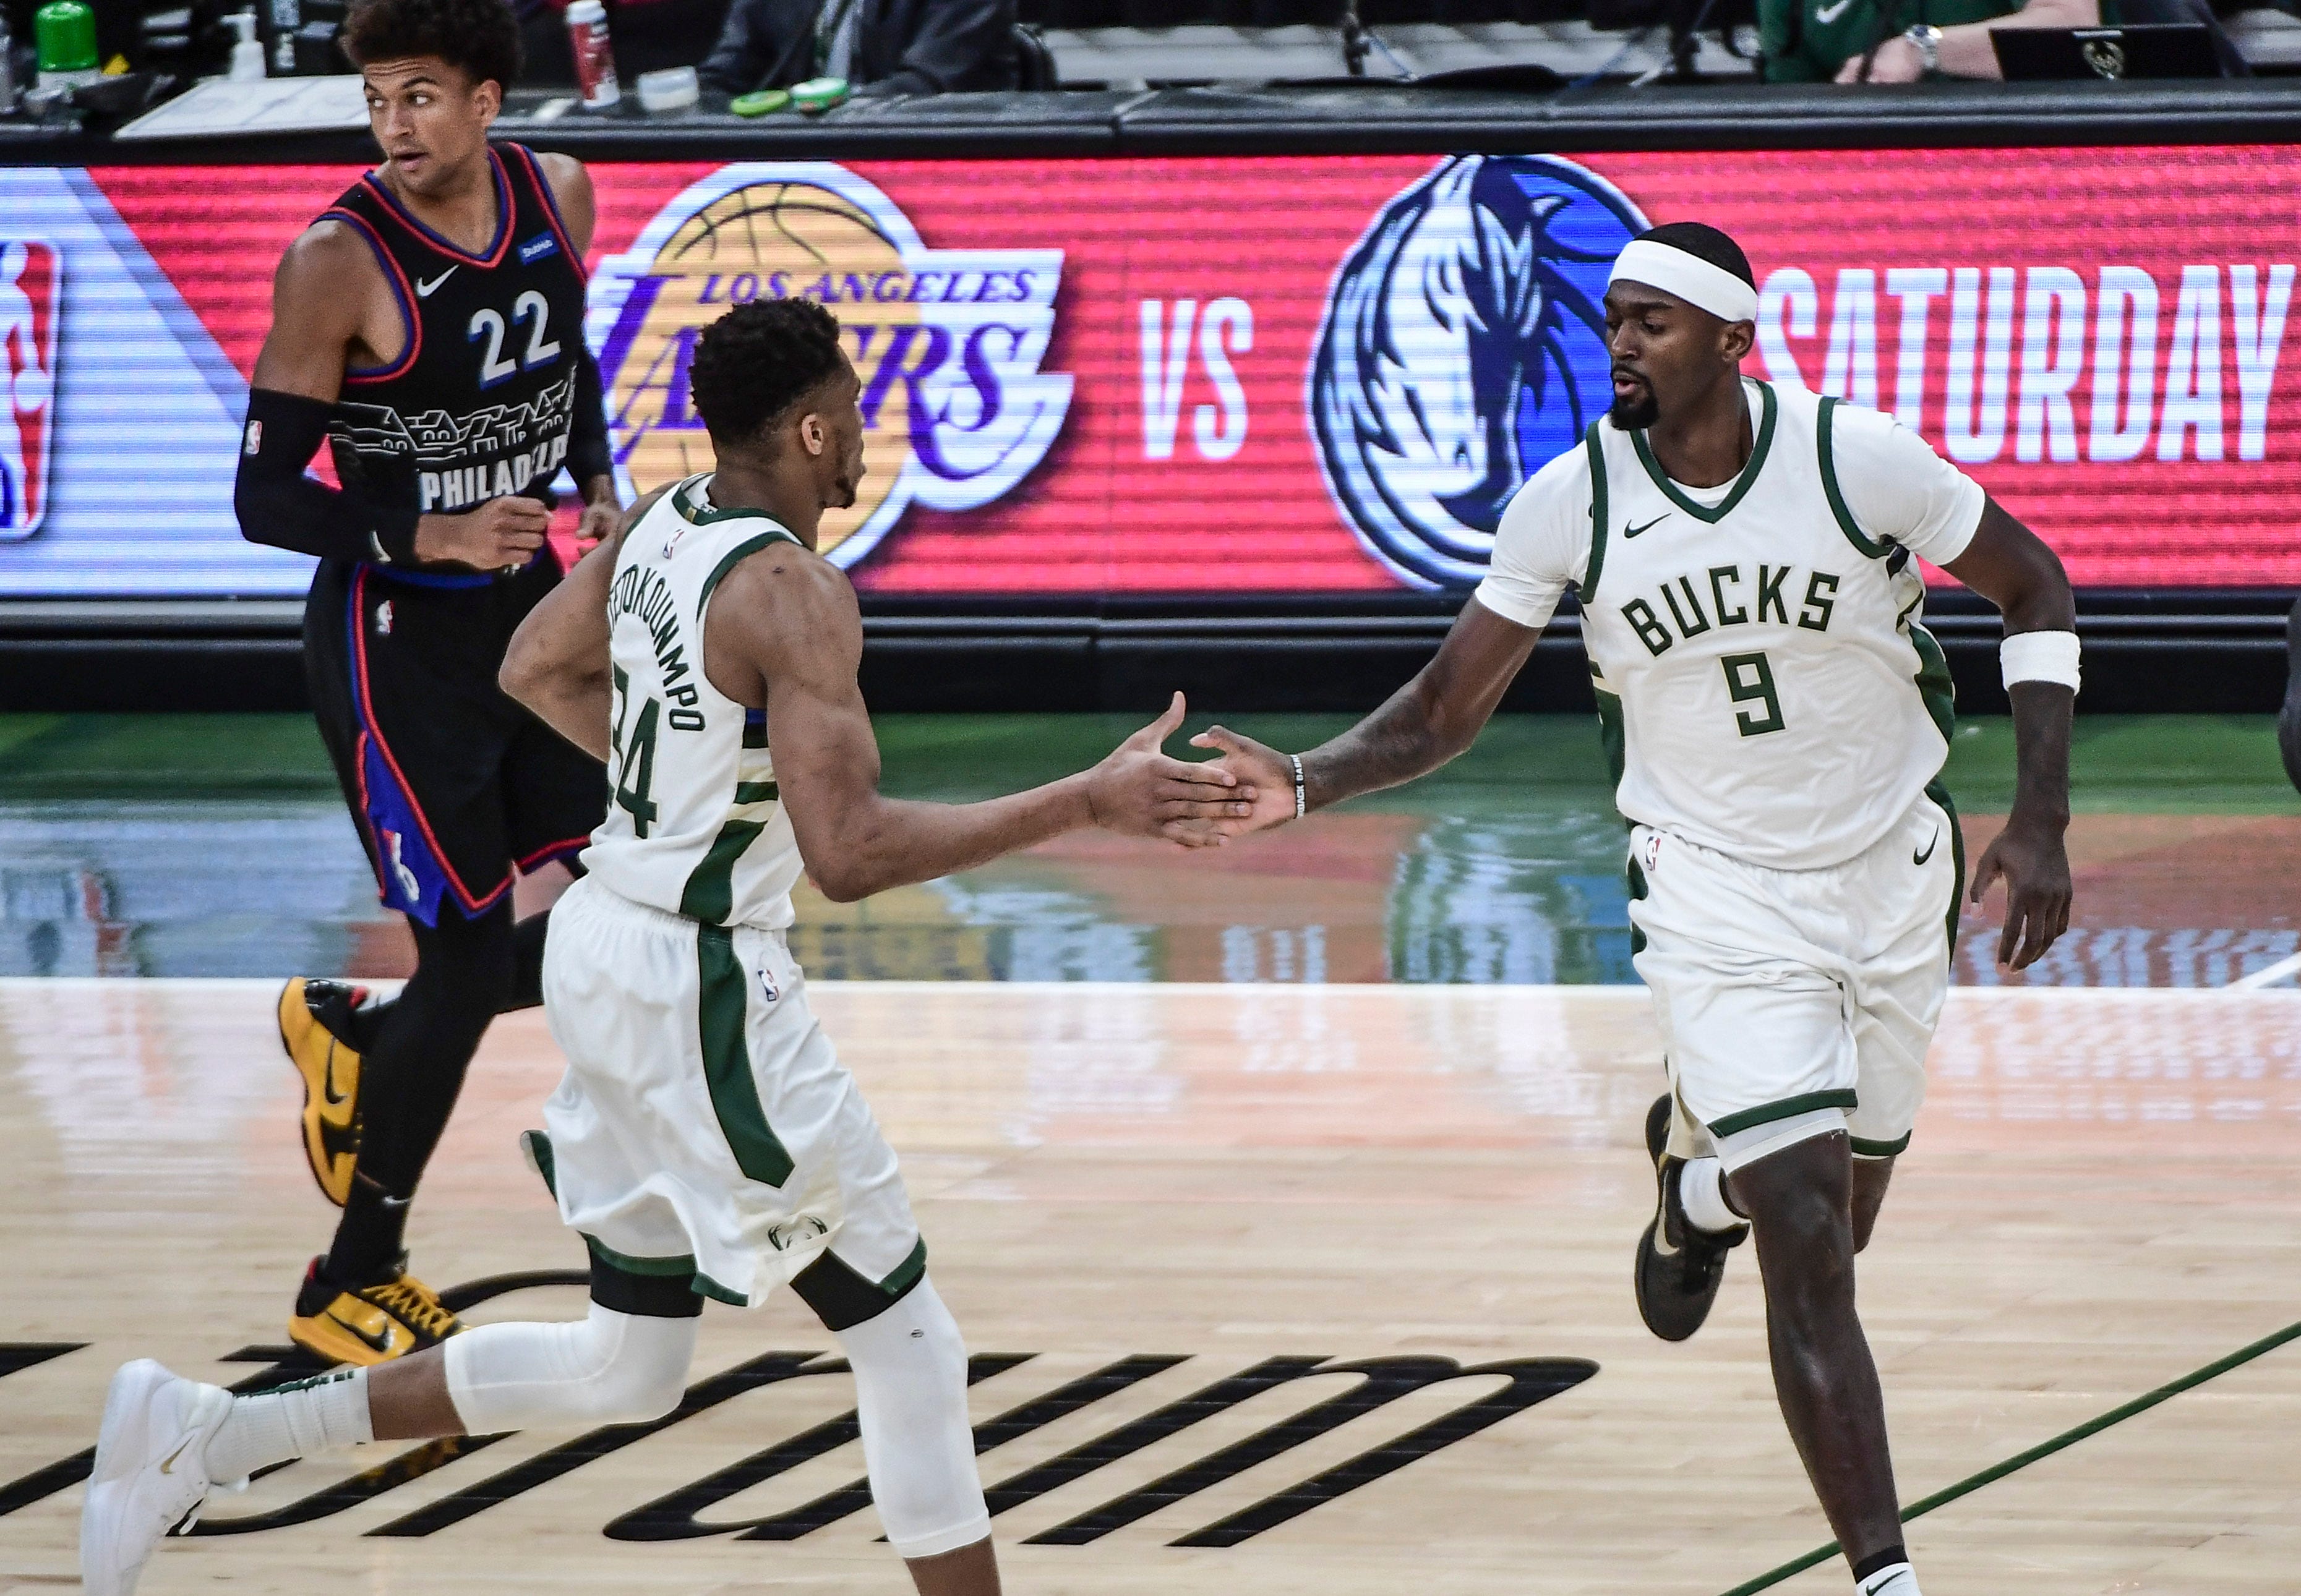 Bobby Portis came to the Bucks to win an NBA championship. His love for the city and team brought him back.